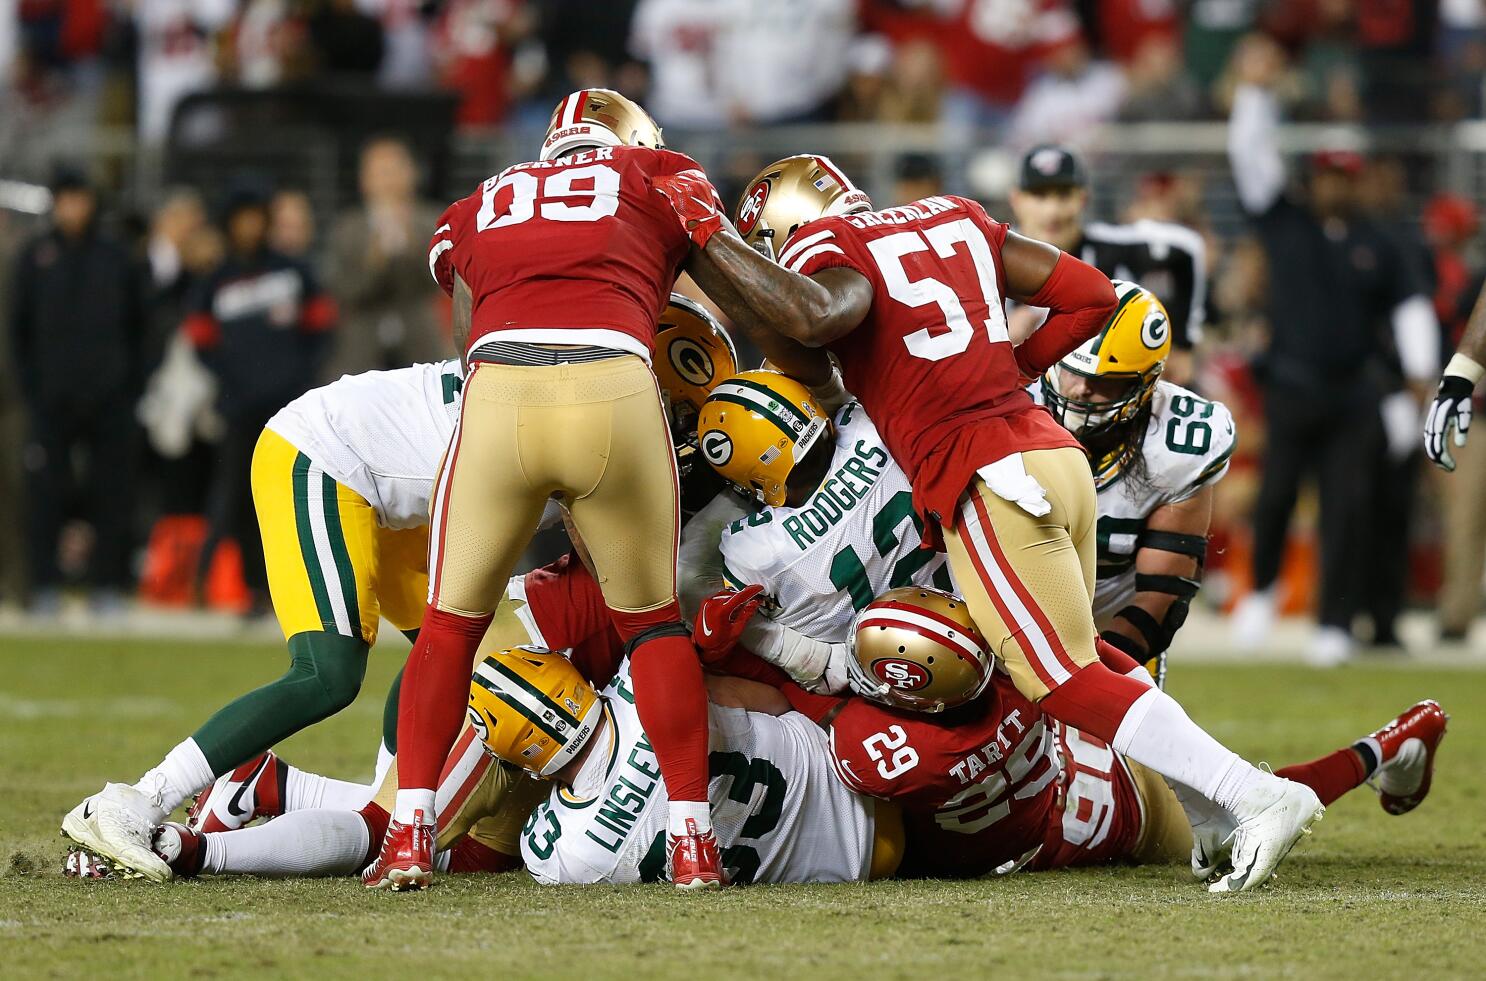 NFL standings: 49ers still lead NFC West, Rams lose ground